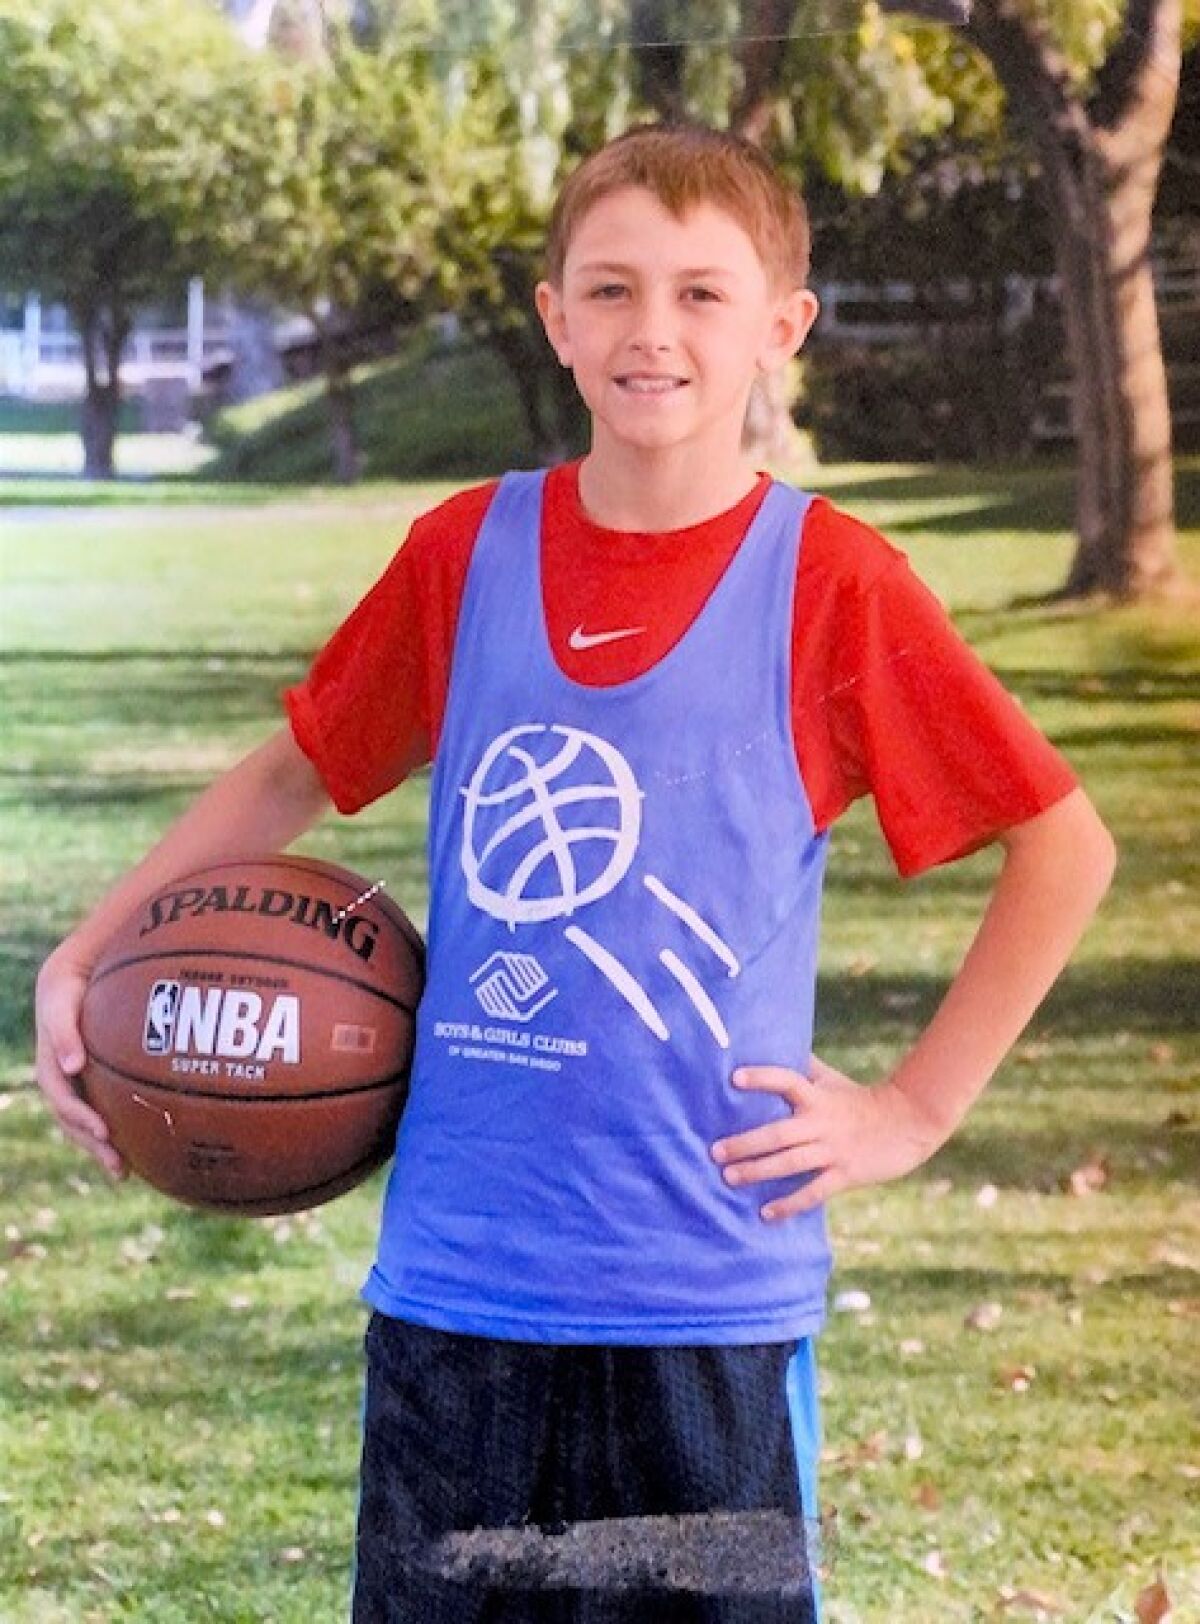 Basketball has always been the sport of choice for Dalton Norvell. This photo was taken when he was 8. 